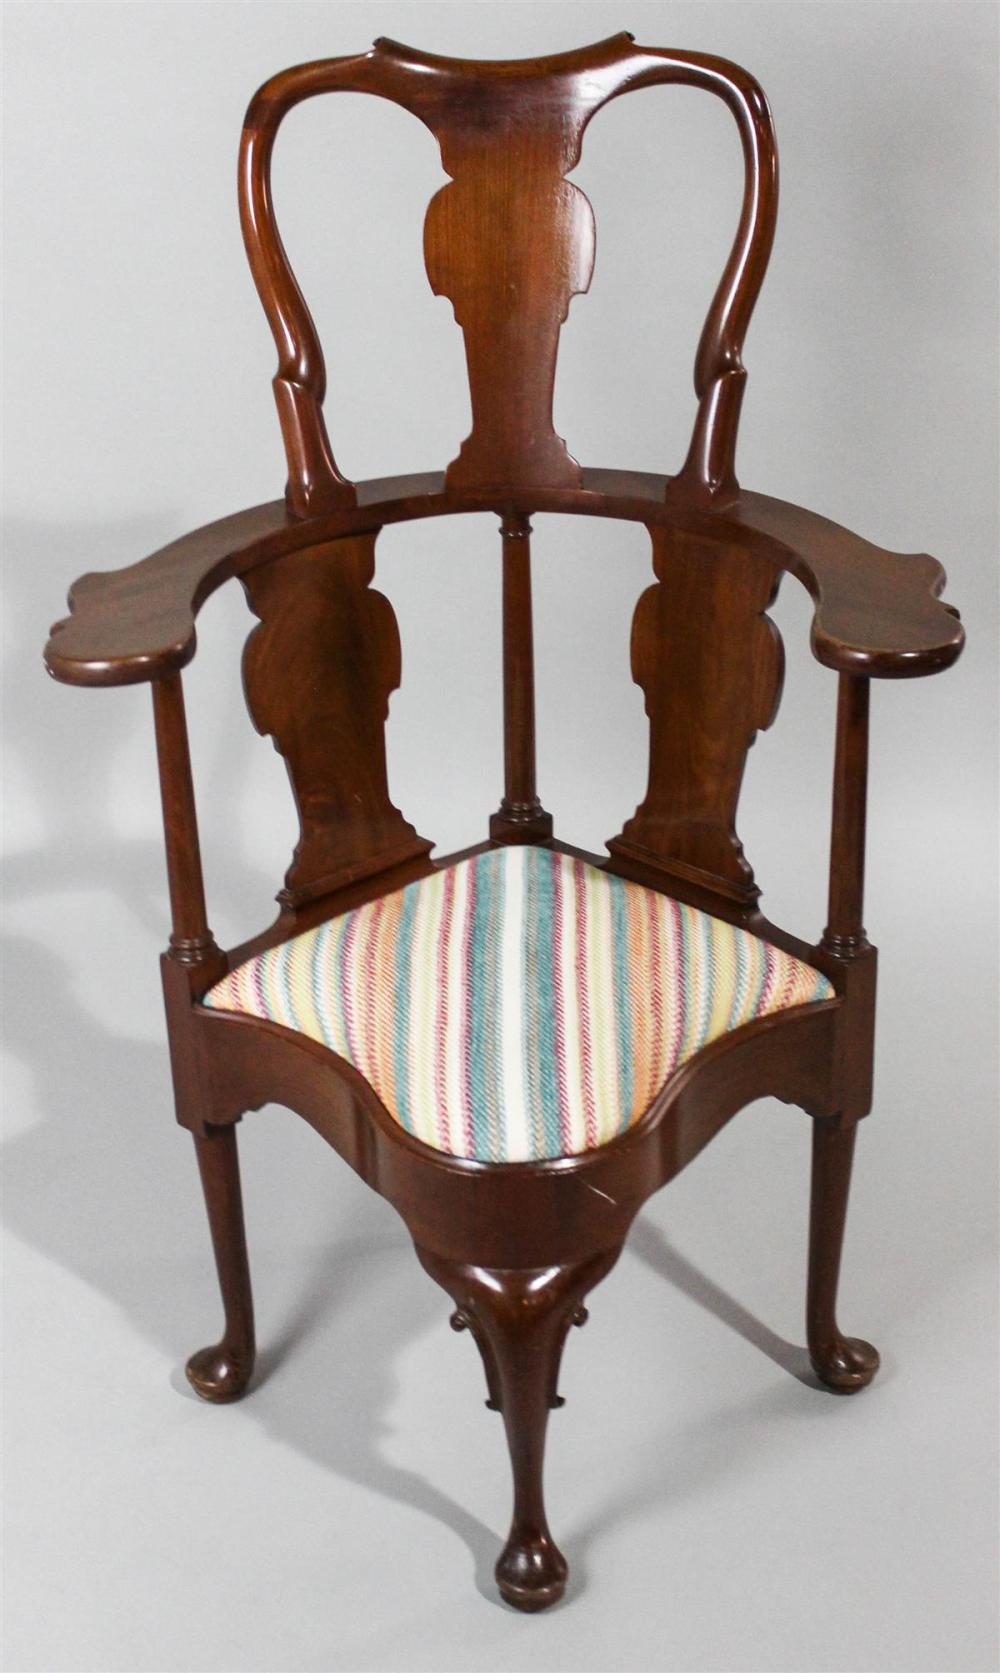 QUEEN ANNE STYLE MAHOGANY TALL 313d02